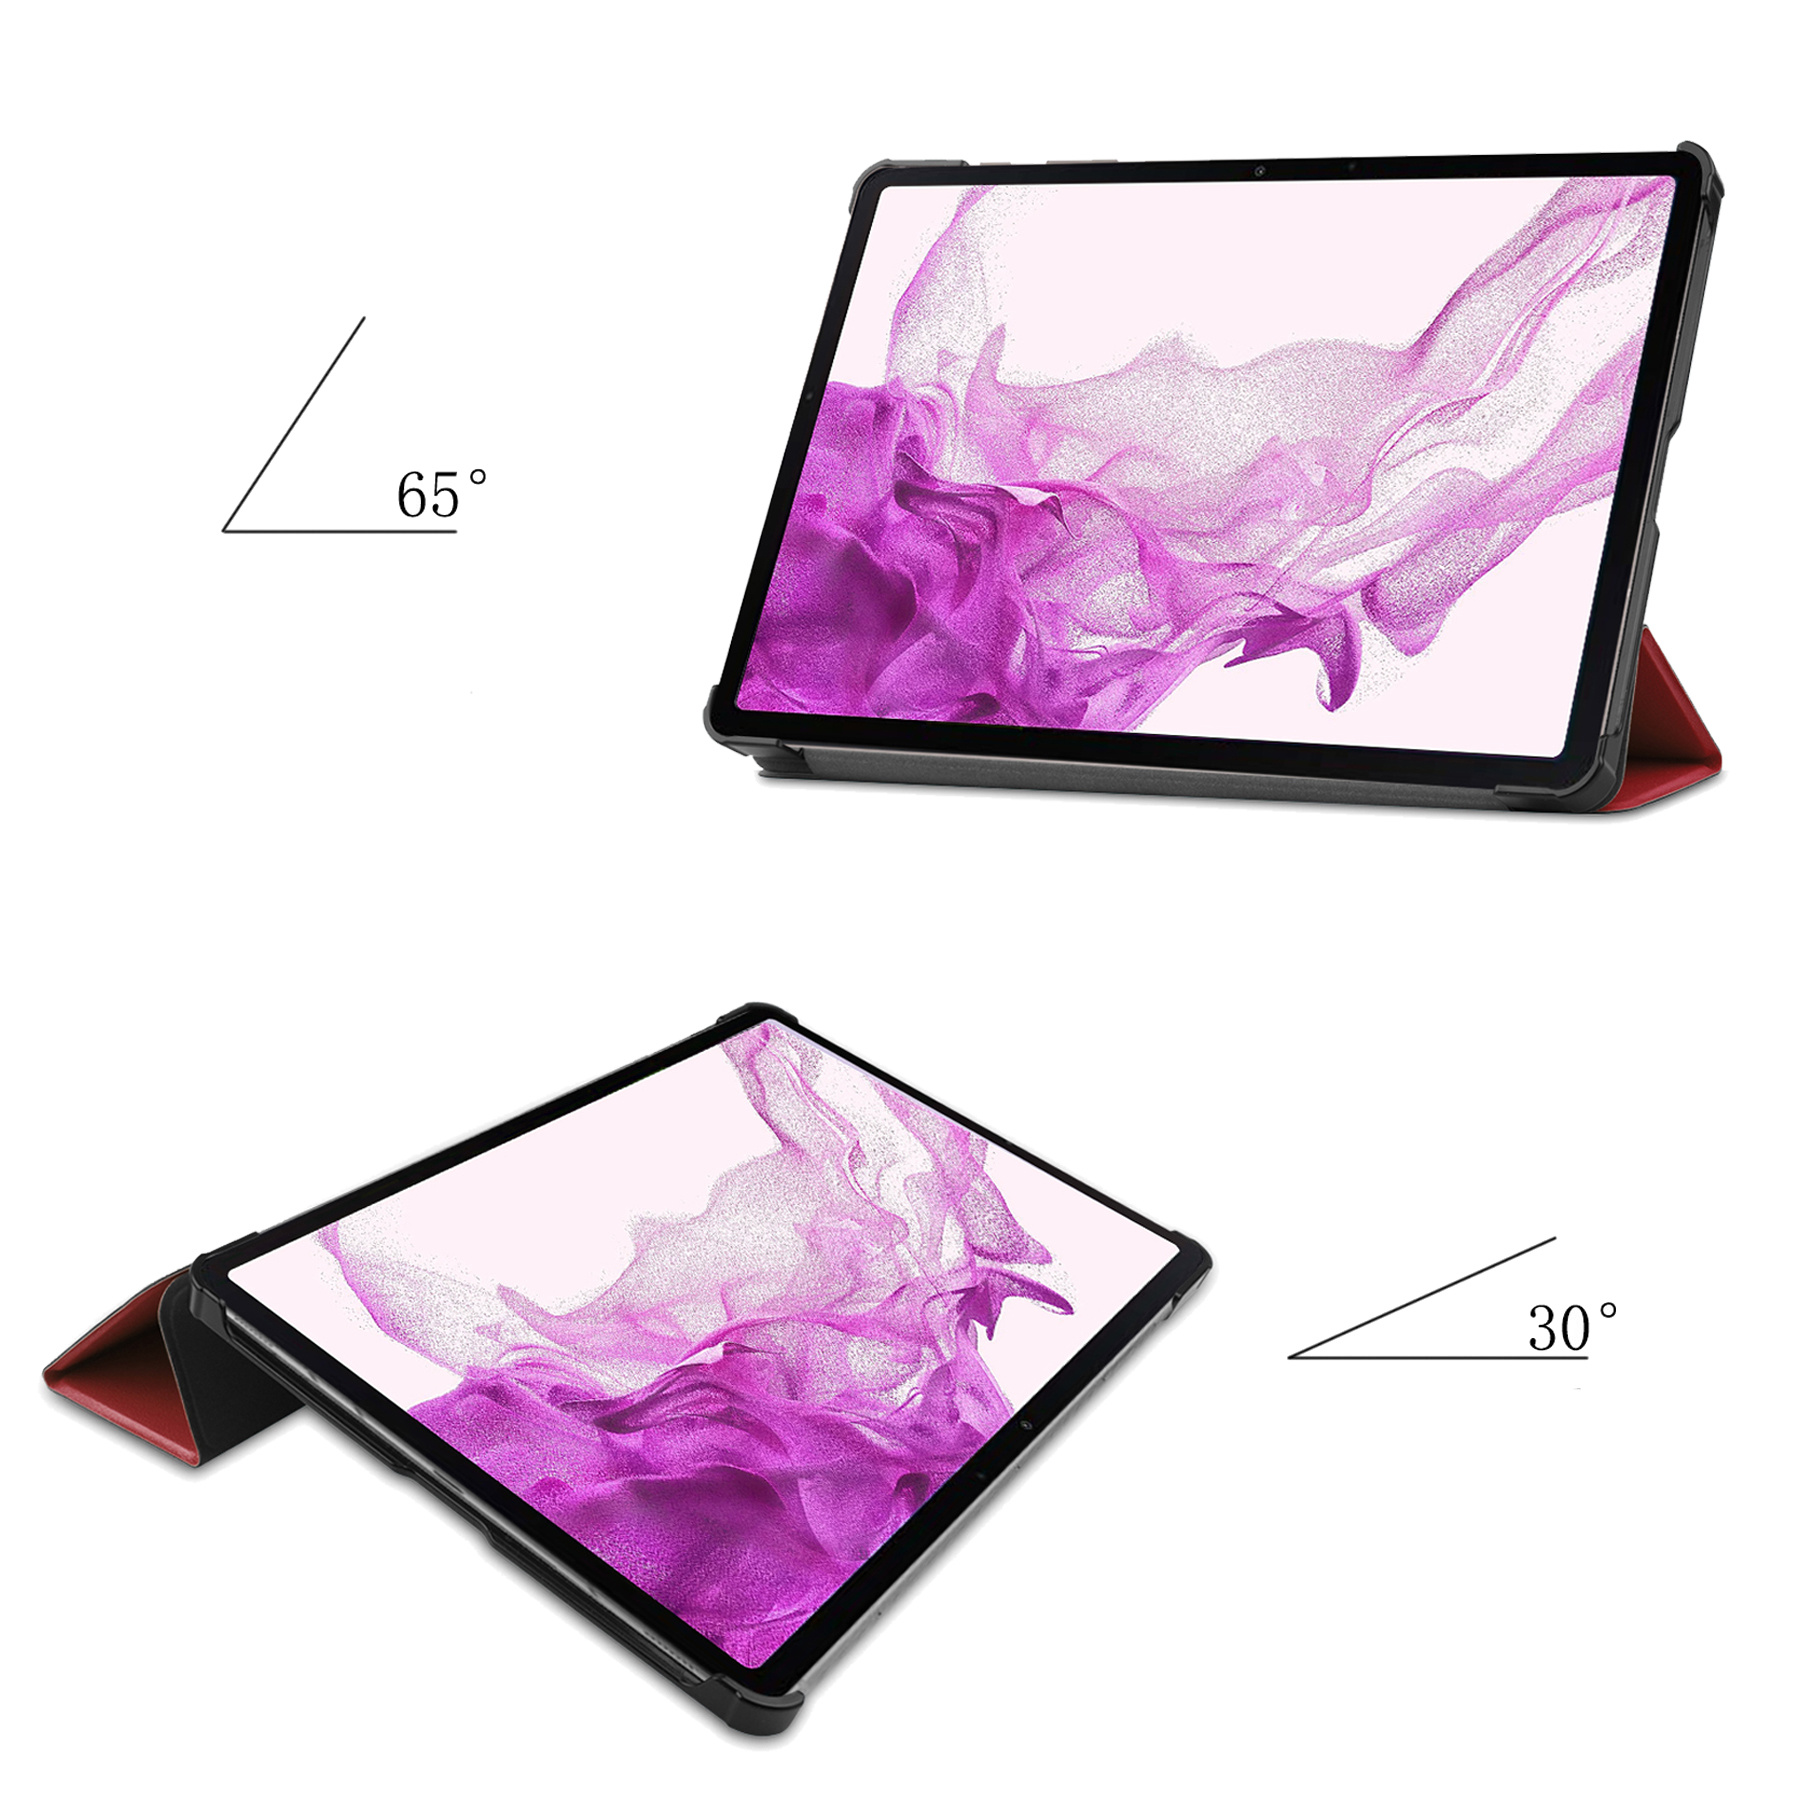 Nomfy Samsung Galaxy Tab S8 Ultra Hoesje 12,4 inch Case Donker Rood - Samsung Galaxy Tab S8 Ultra Hoes Hardcover Hoesje Bookcase Met Uitsparing S Pen - Donker Rood